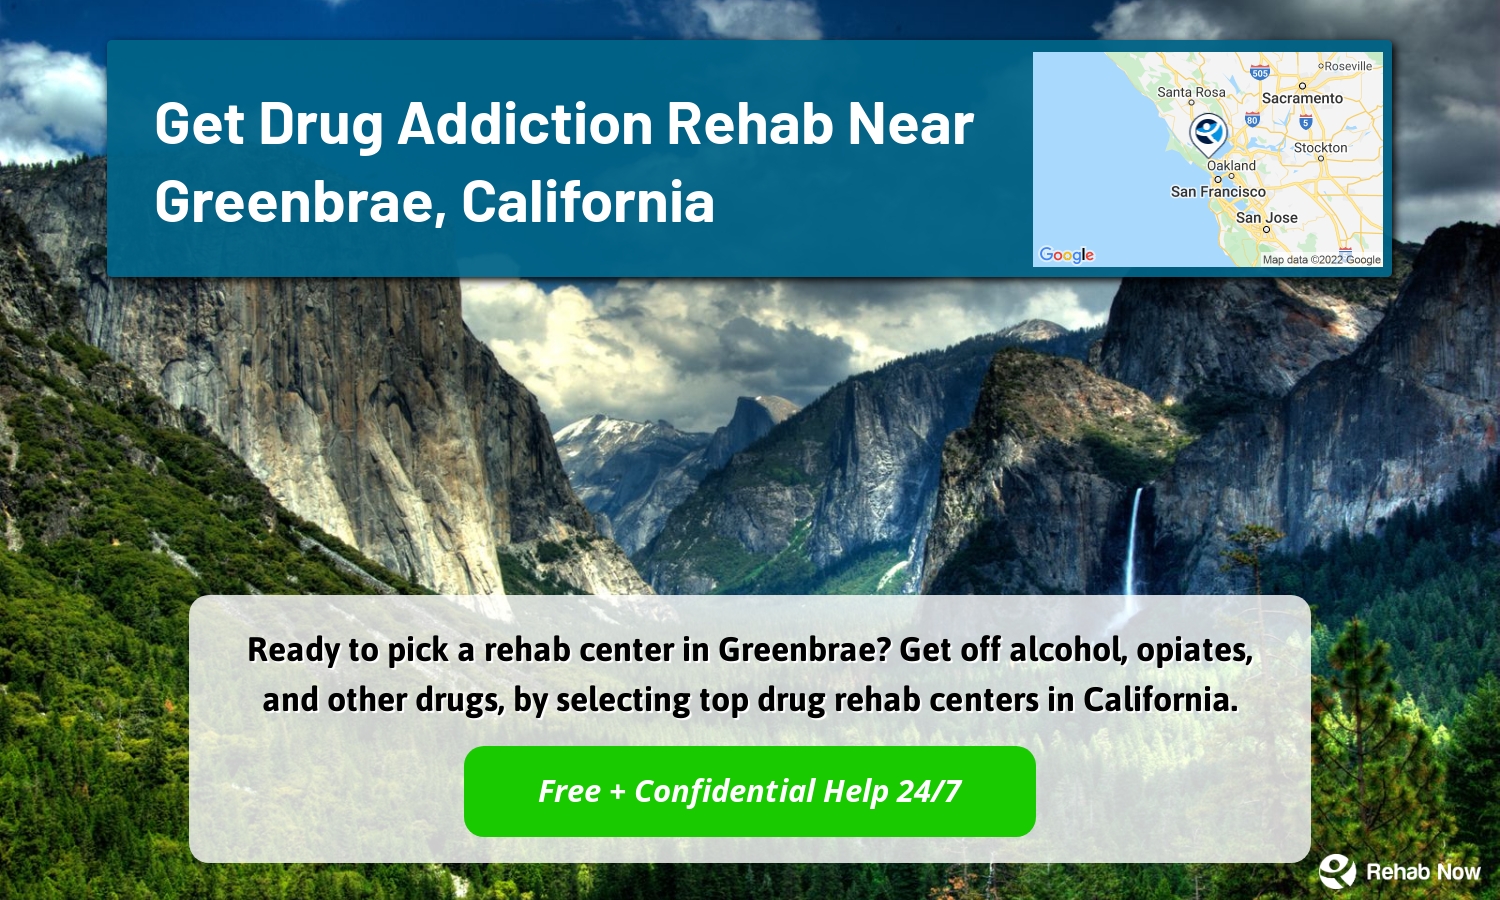 Ready to pick a rehab center in Greenbrae? Get off alcohol, opiates, and other drugs, by selecting top drug rehab centers in California.